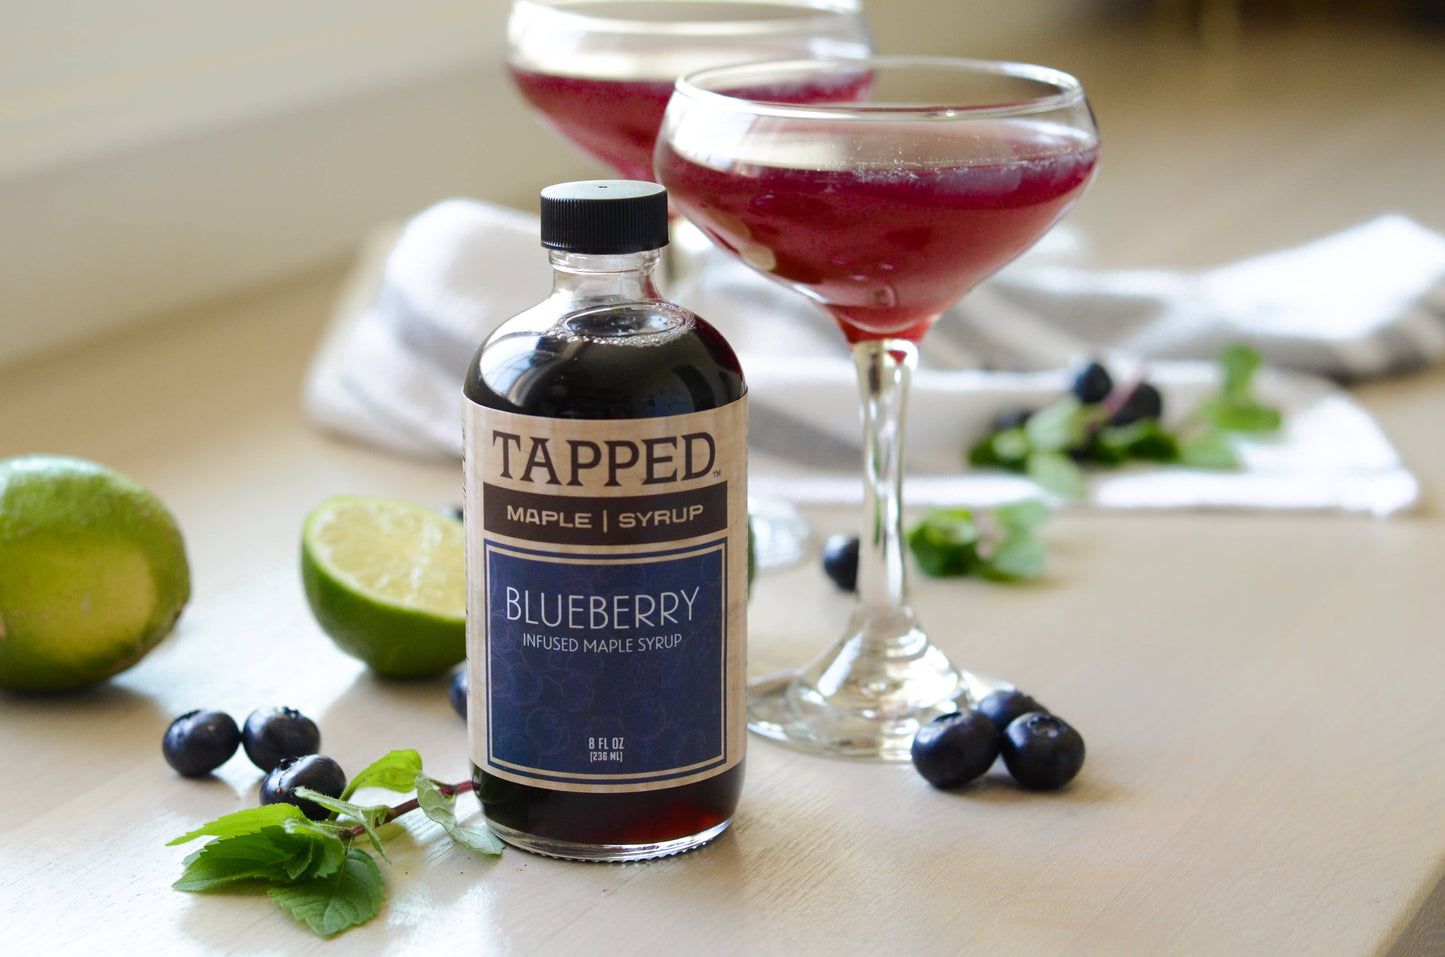 Blueberry Infused Maple Syrup - Half-pint (8 fl oz)